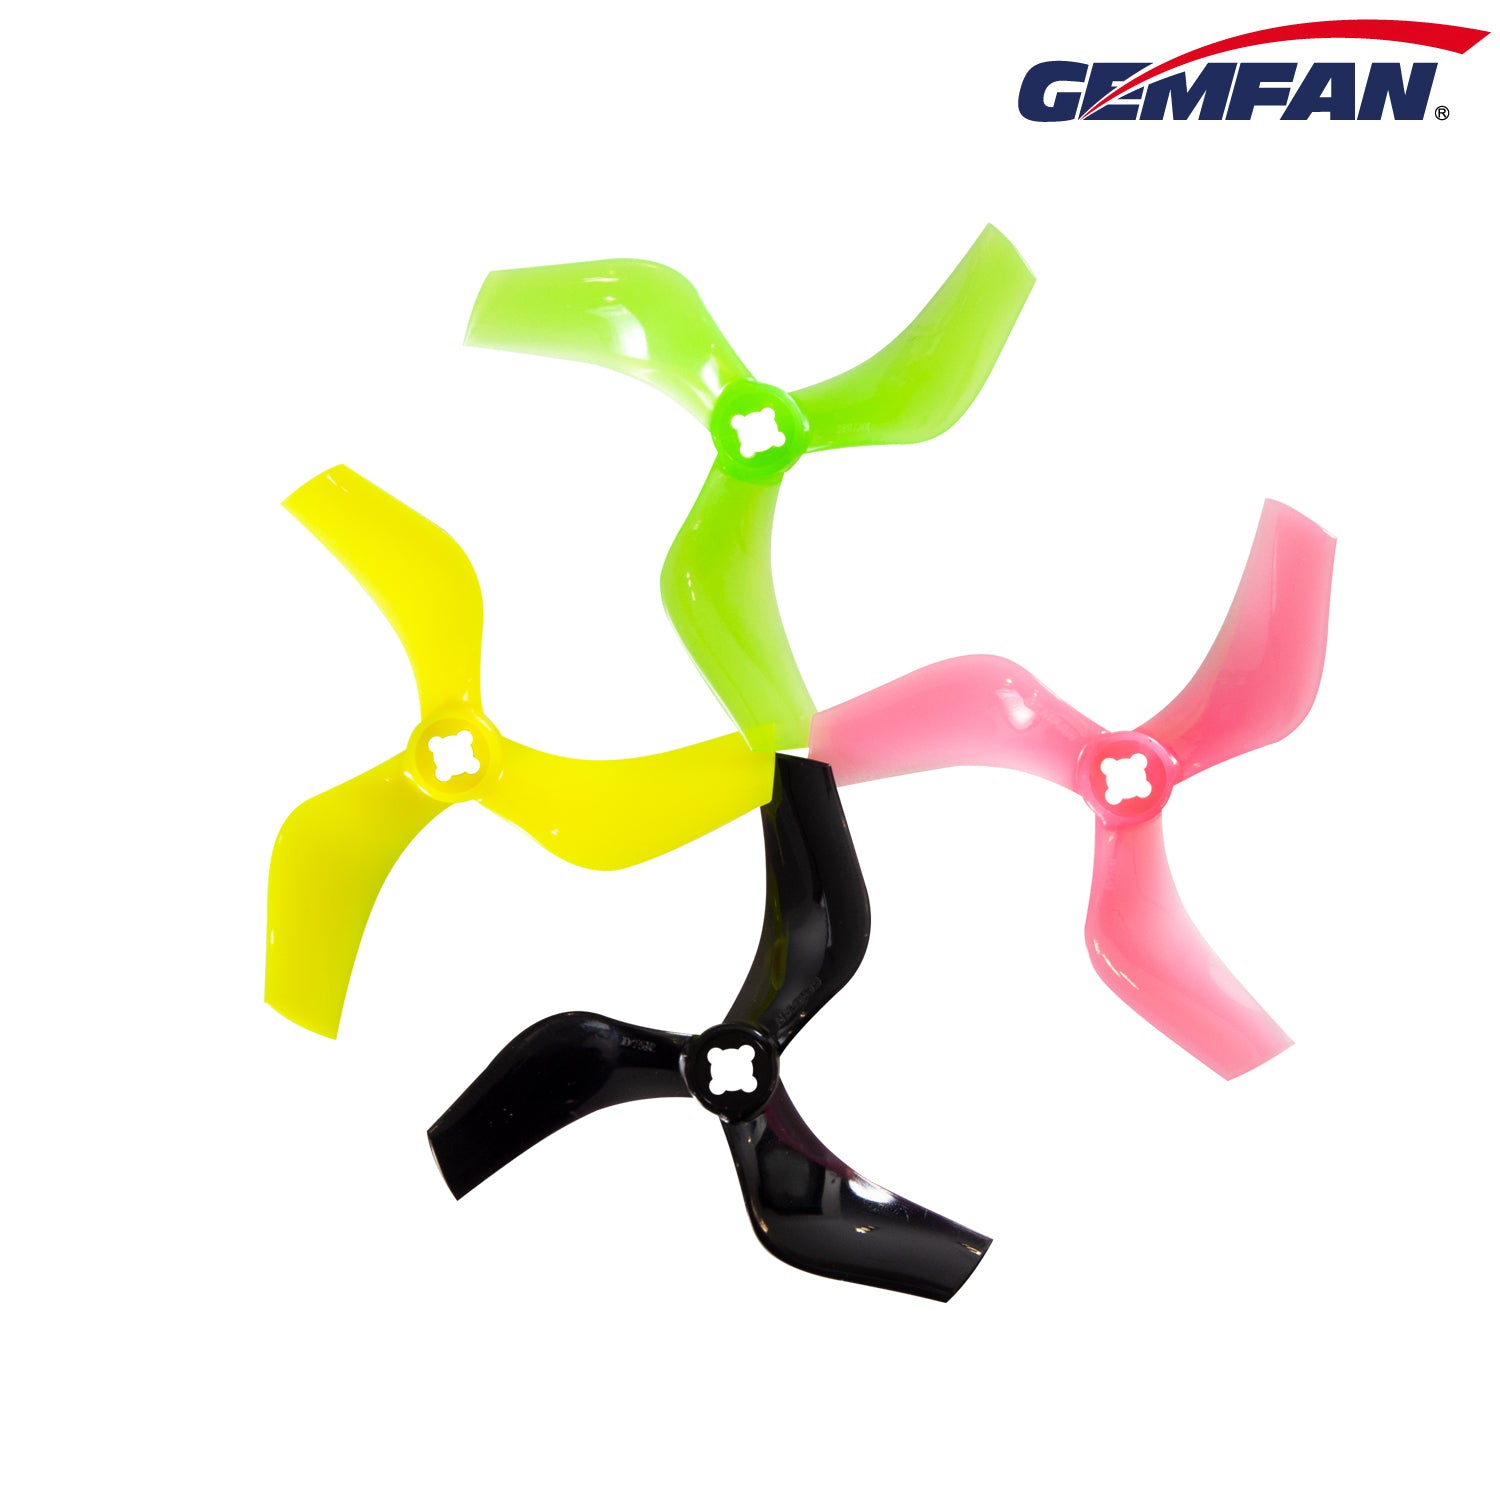 Gemfan D75 75mm 3" Ducted 3-Blade Propellers w/M5 Adapters - 1.5mm Shaft (2CW + 2CCW)